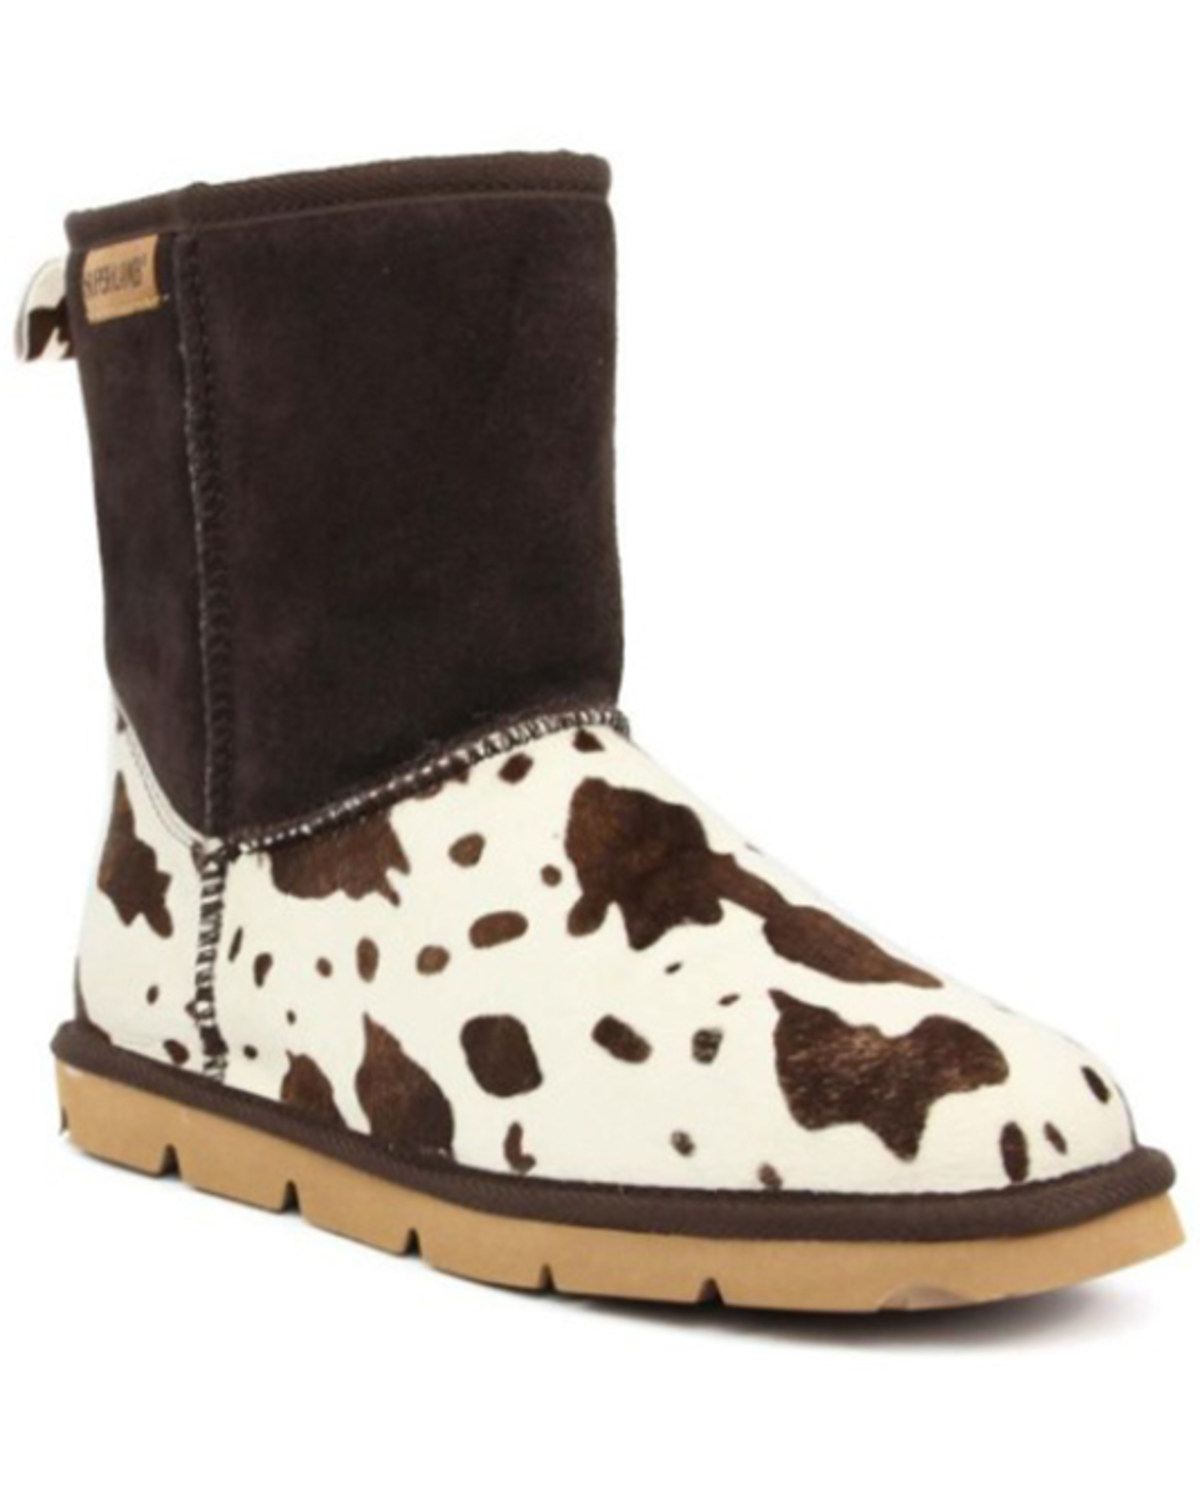 Superlamb Women's Turano Cow Print Real Hair-On Casual Pull On Boots - Round Toe